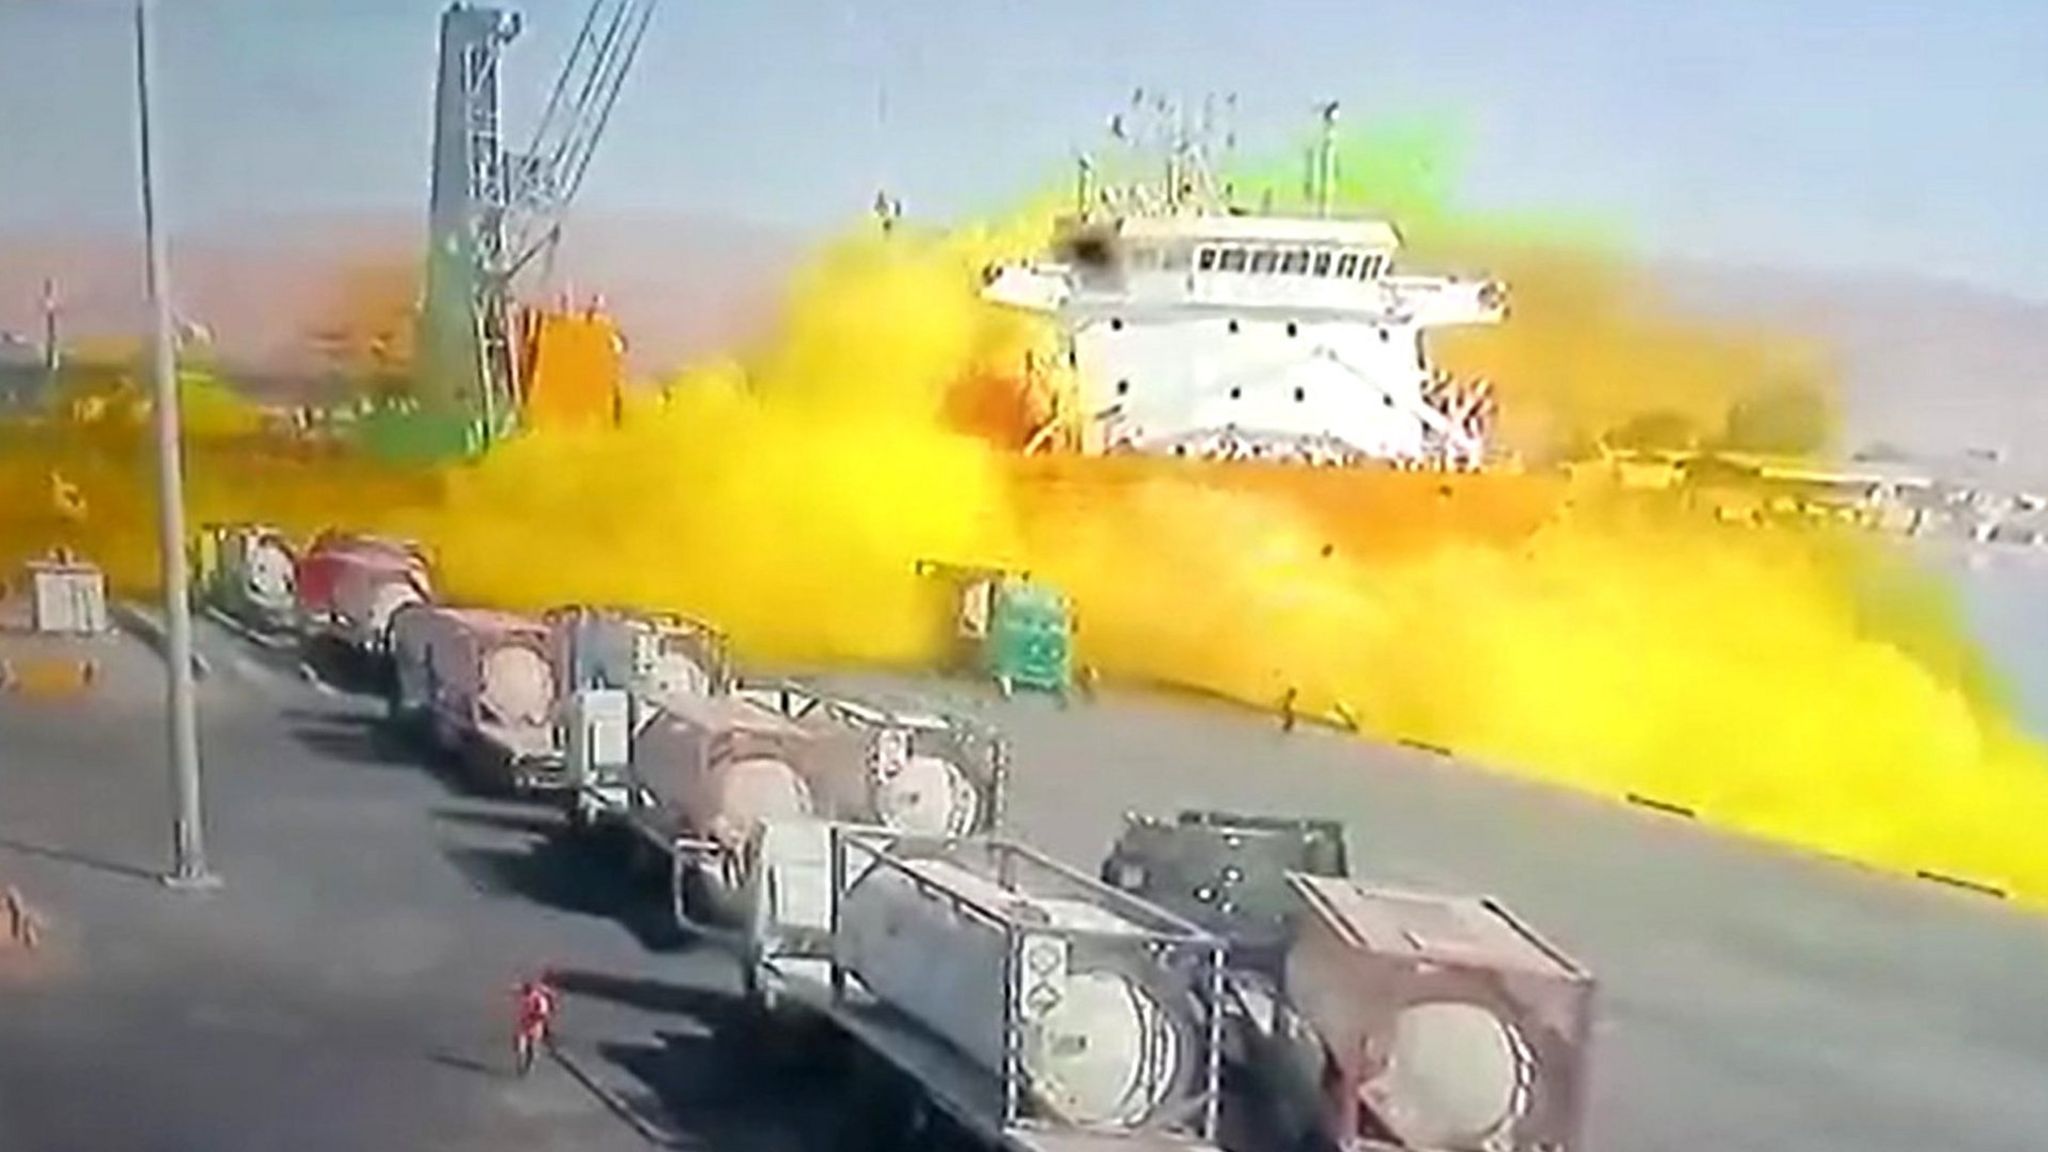 State-owned AlMamlaka TV broadcast footage showing the toxic gas cloud at Jordan's Aqaba port